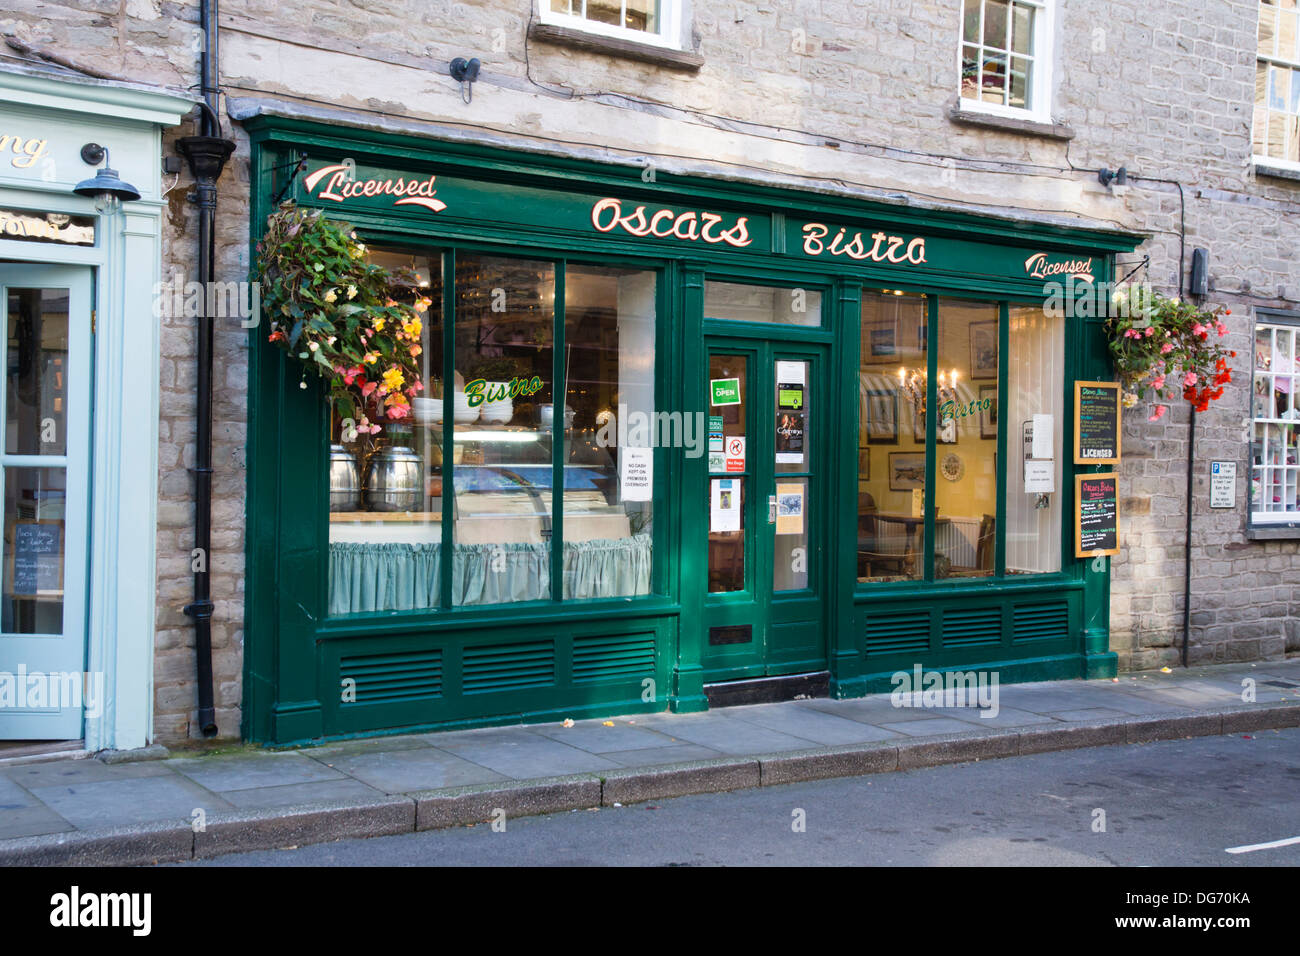 Hay-on Wye a small town in Powys Wales famous for its bookshops and Literary festival.  Oscars Bistro Stock Photo